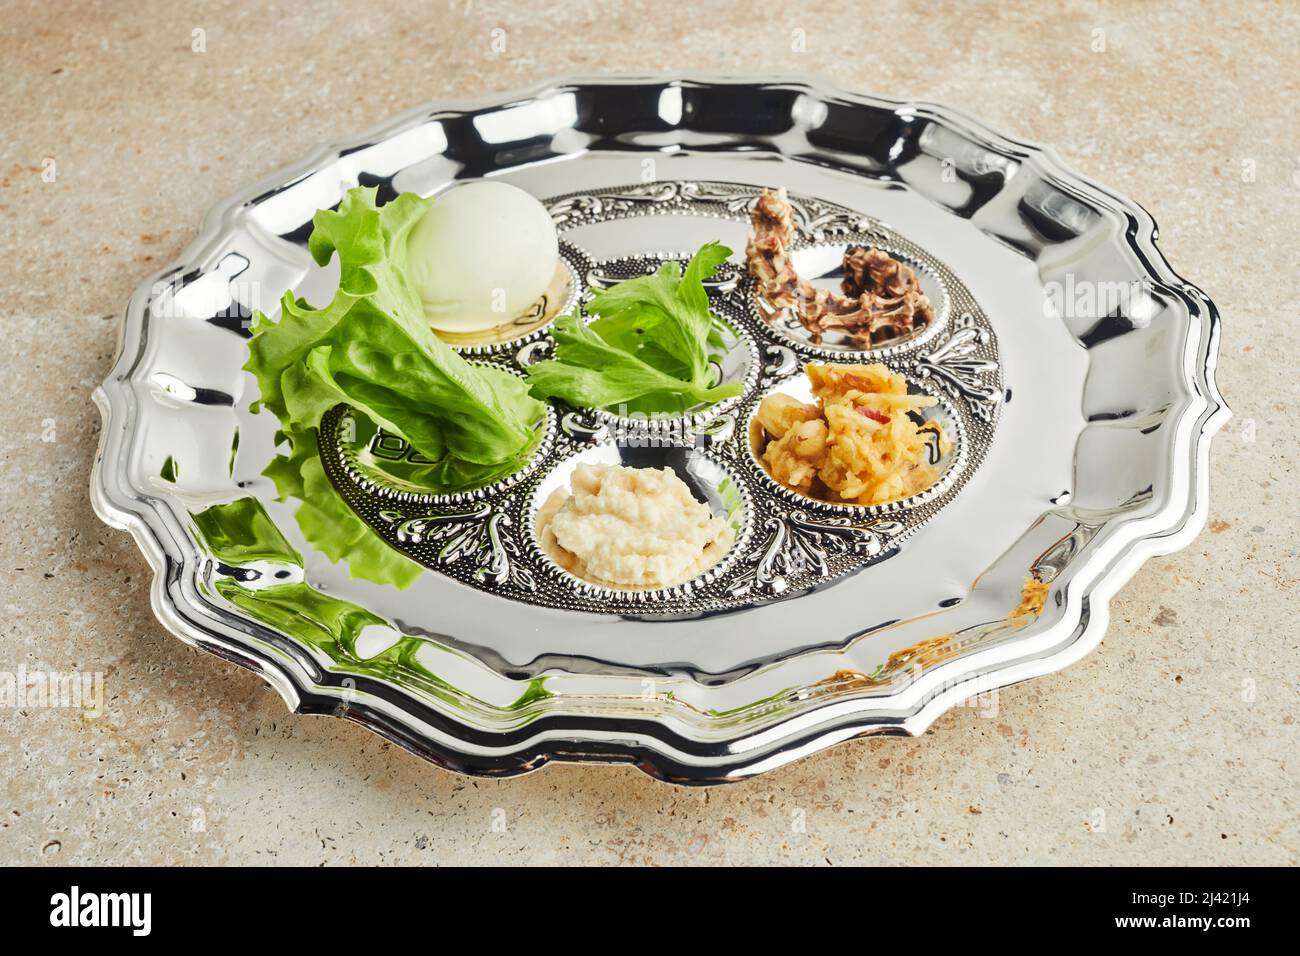 Passover Seder plate with traditional food ontravertine stone background Stock Photo